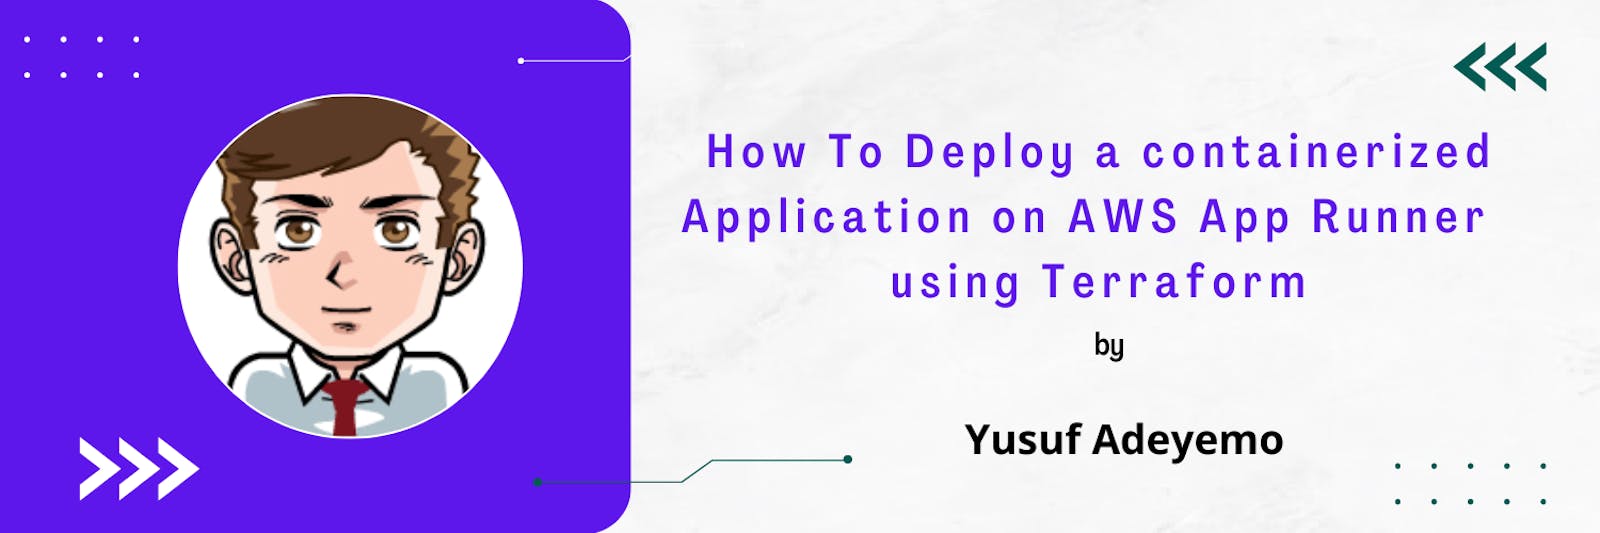 How To Deploy a containerized Application on AWS App Runner  using Terraform